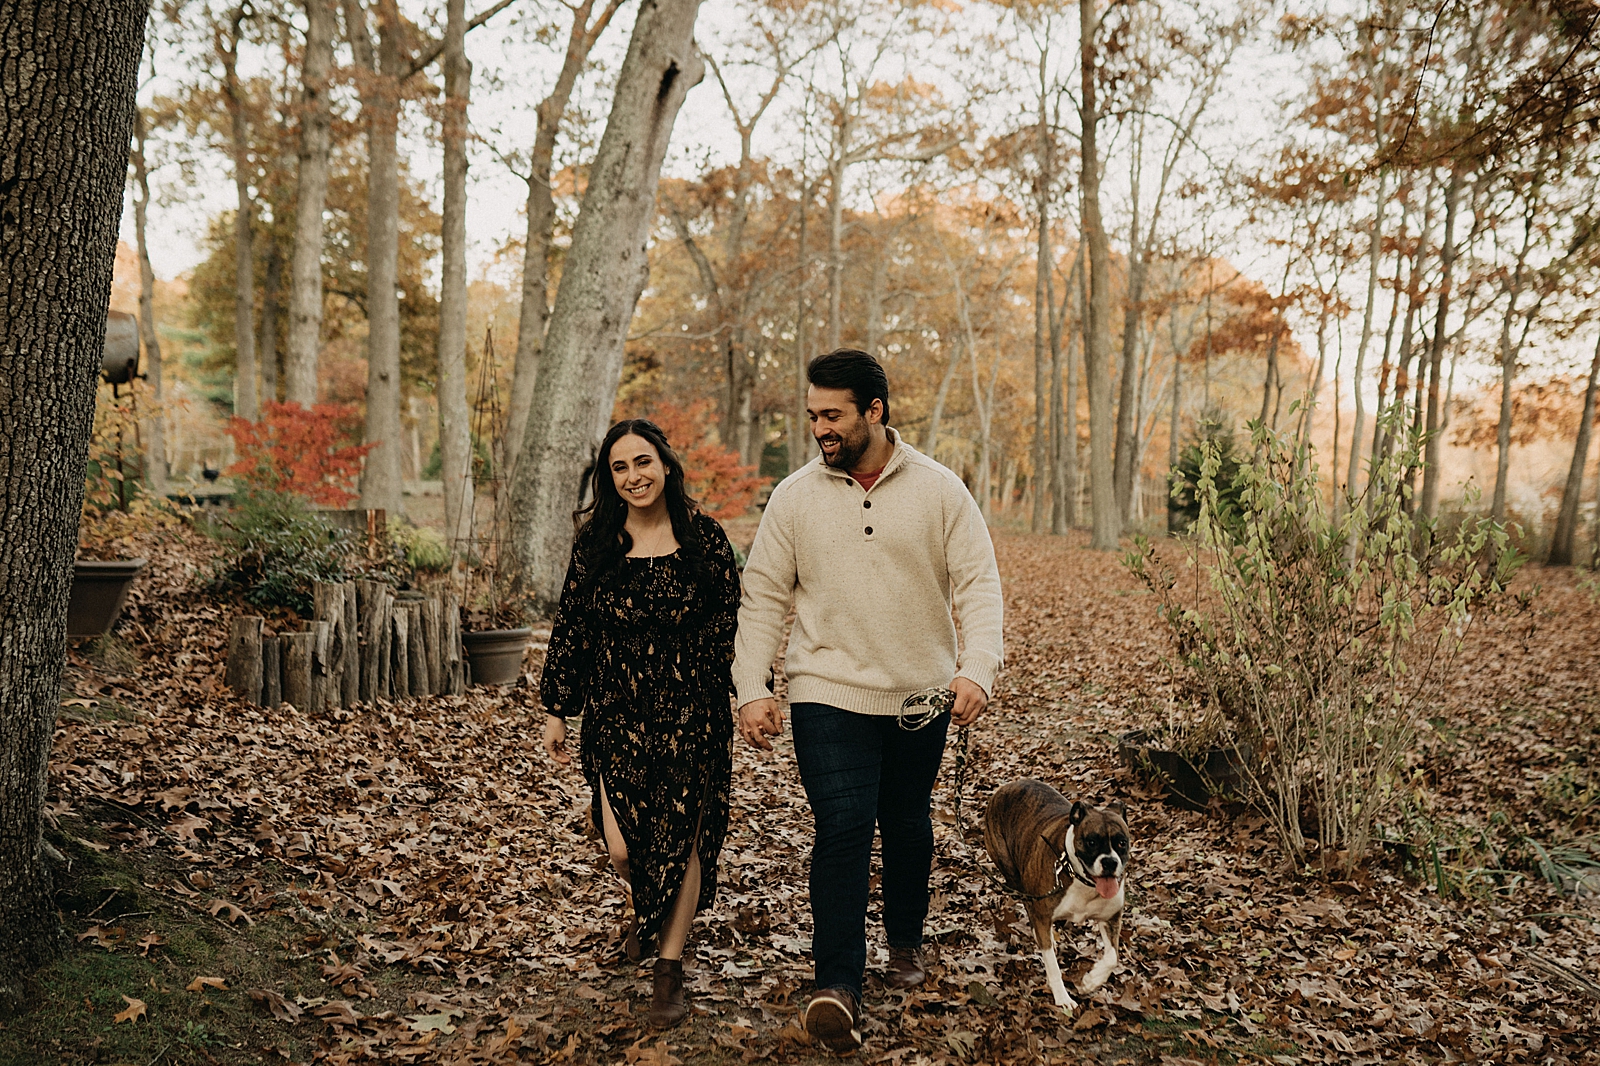 Couple holding hands and walking on Fall ground with dog with them